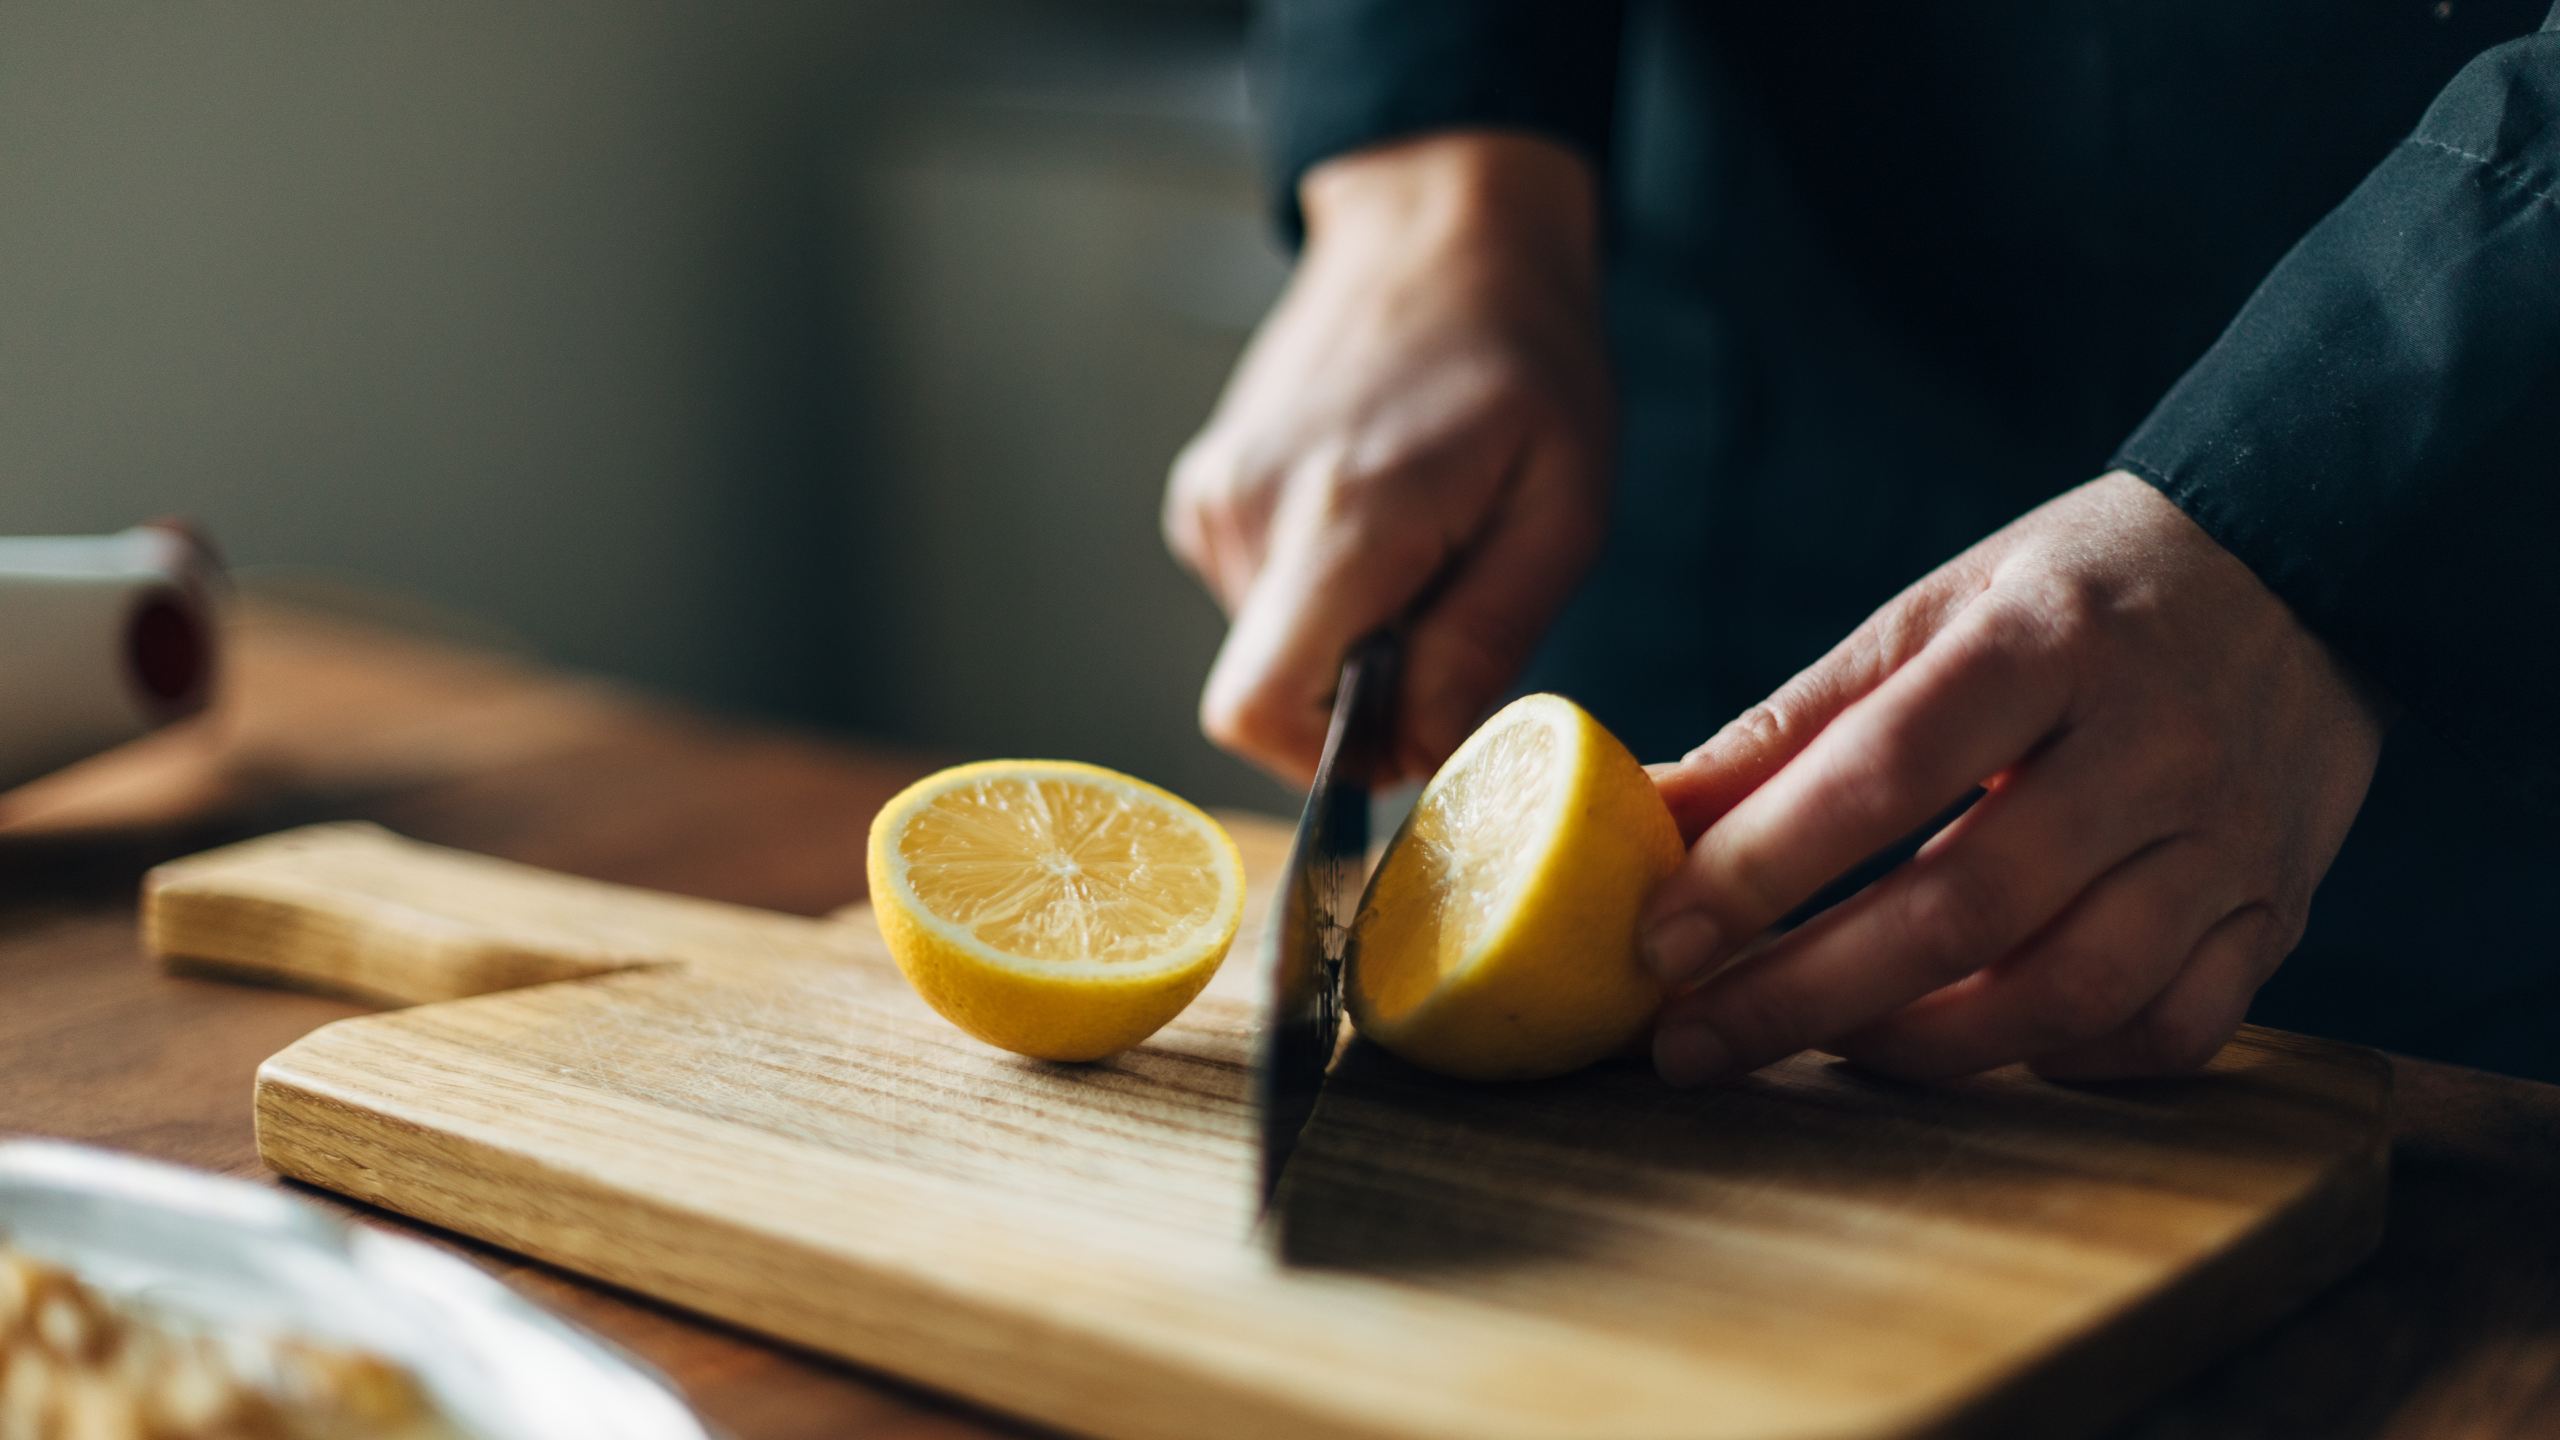 Hands slicing a lemon in half, on a wooden cutting board.